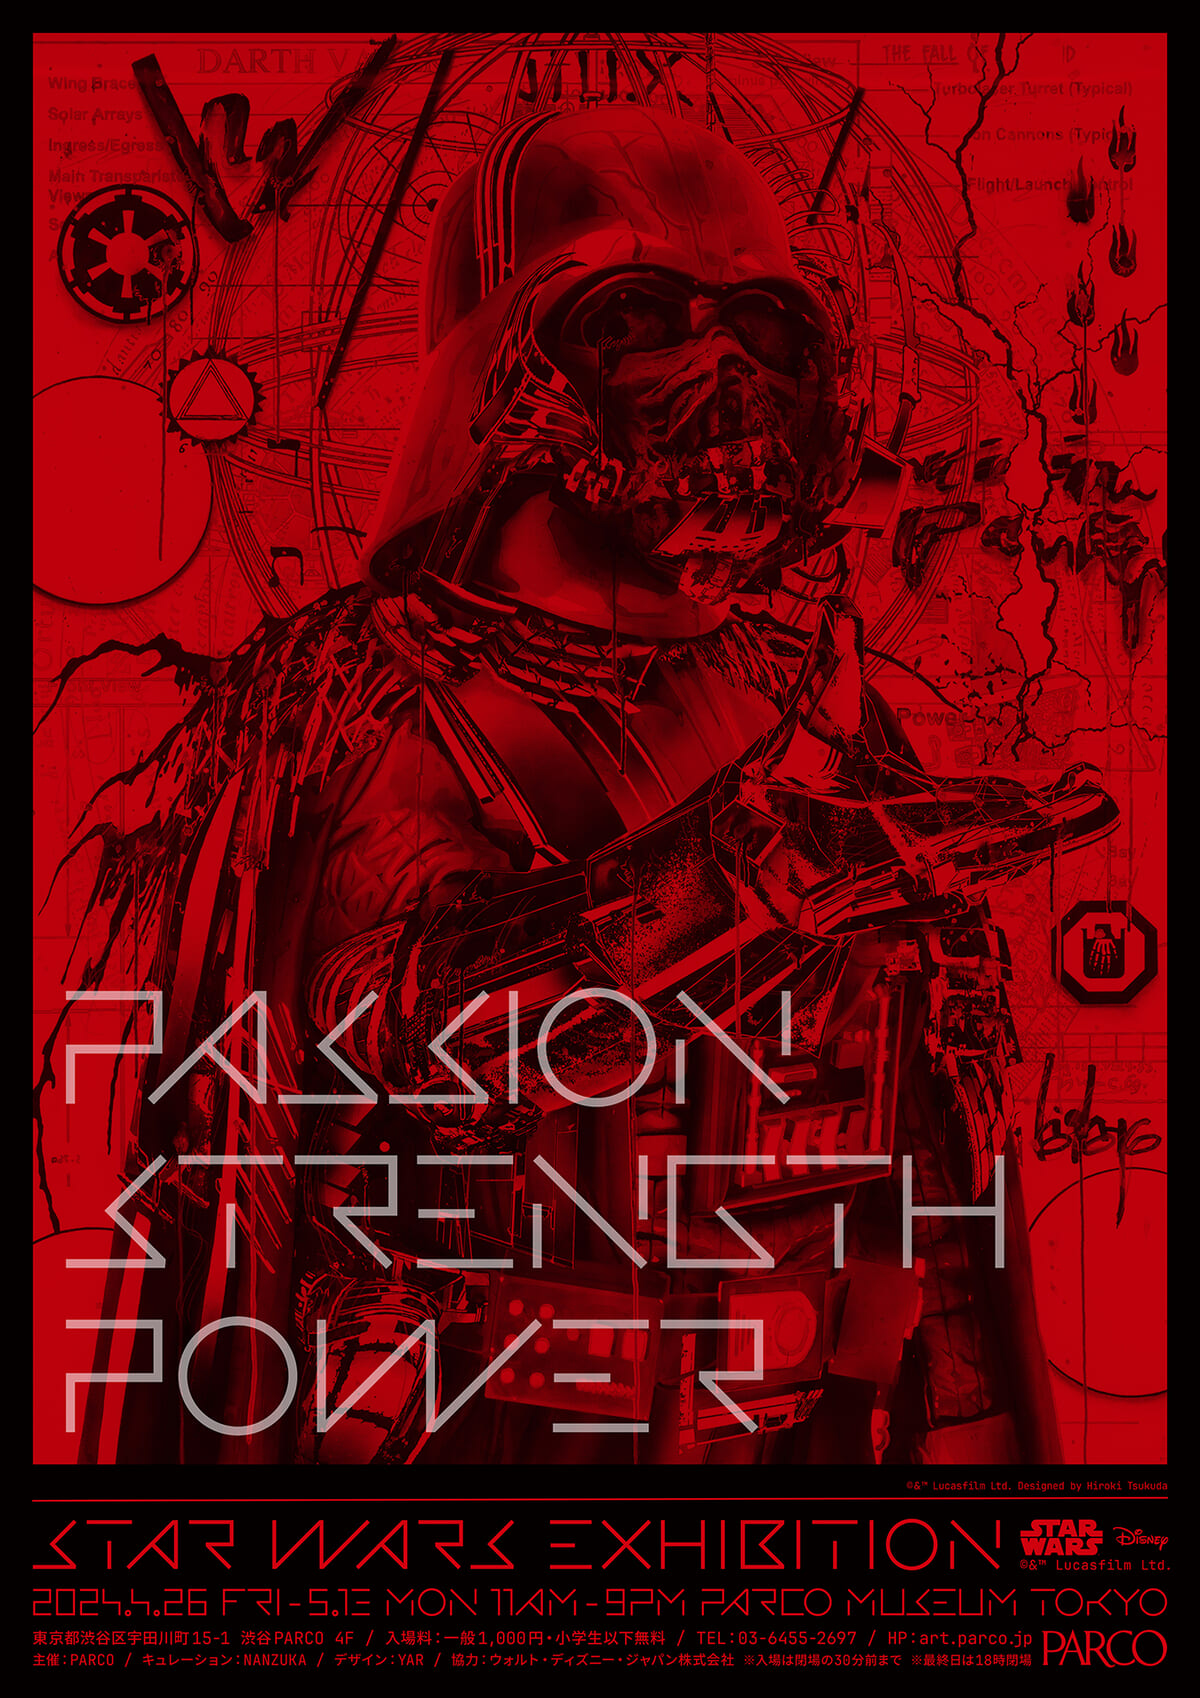 C-3POやダース・ベイダーのアートを展示！渋谷・心斎橋PARCO「STAR WARS EXHIBITION“PASSION STRENGTH POWER”」